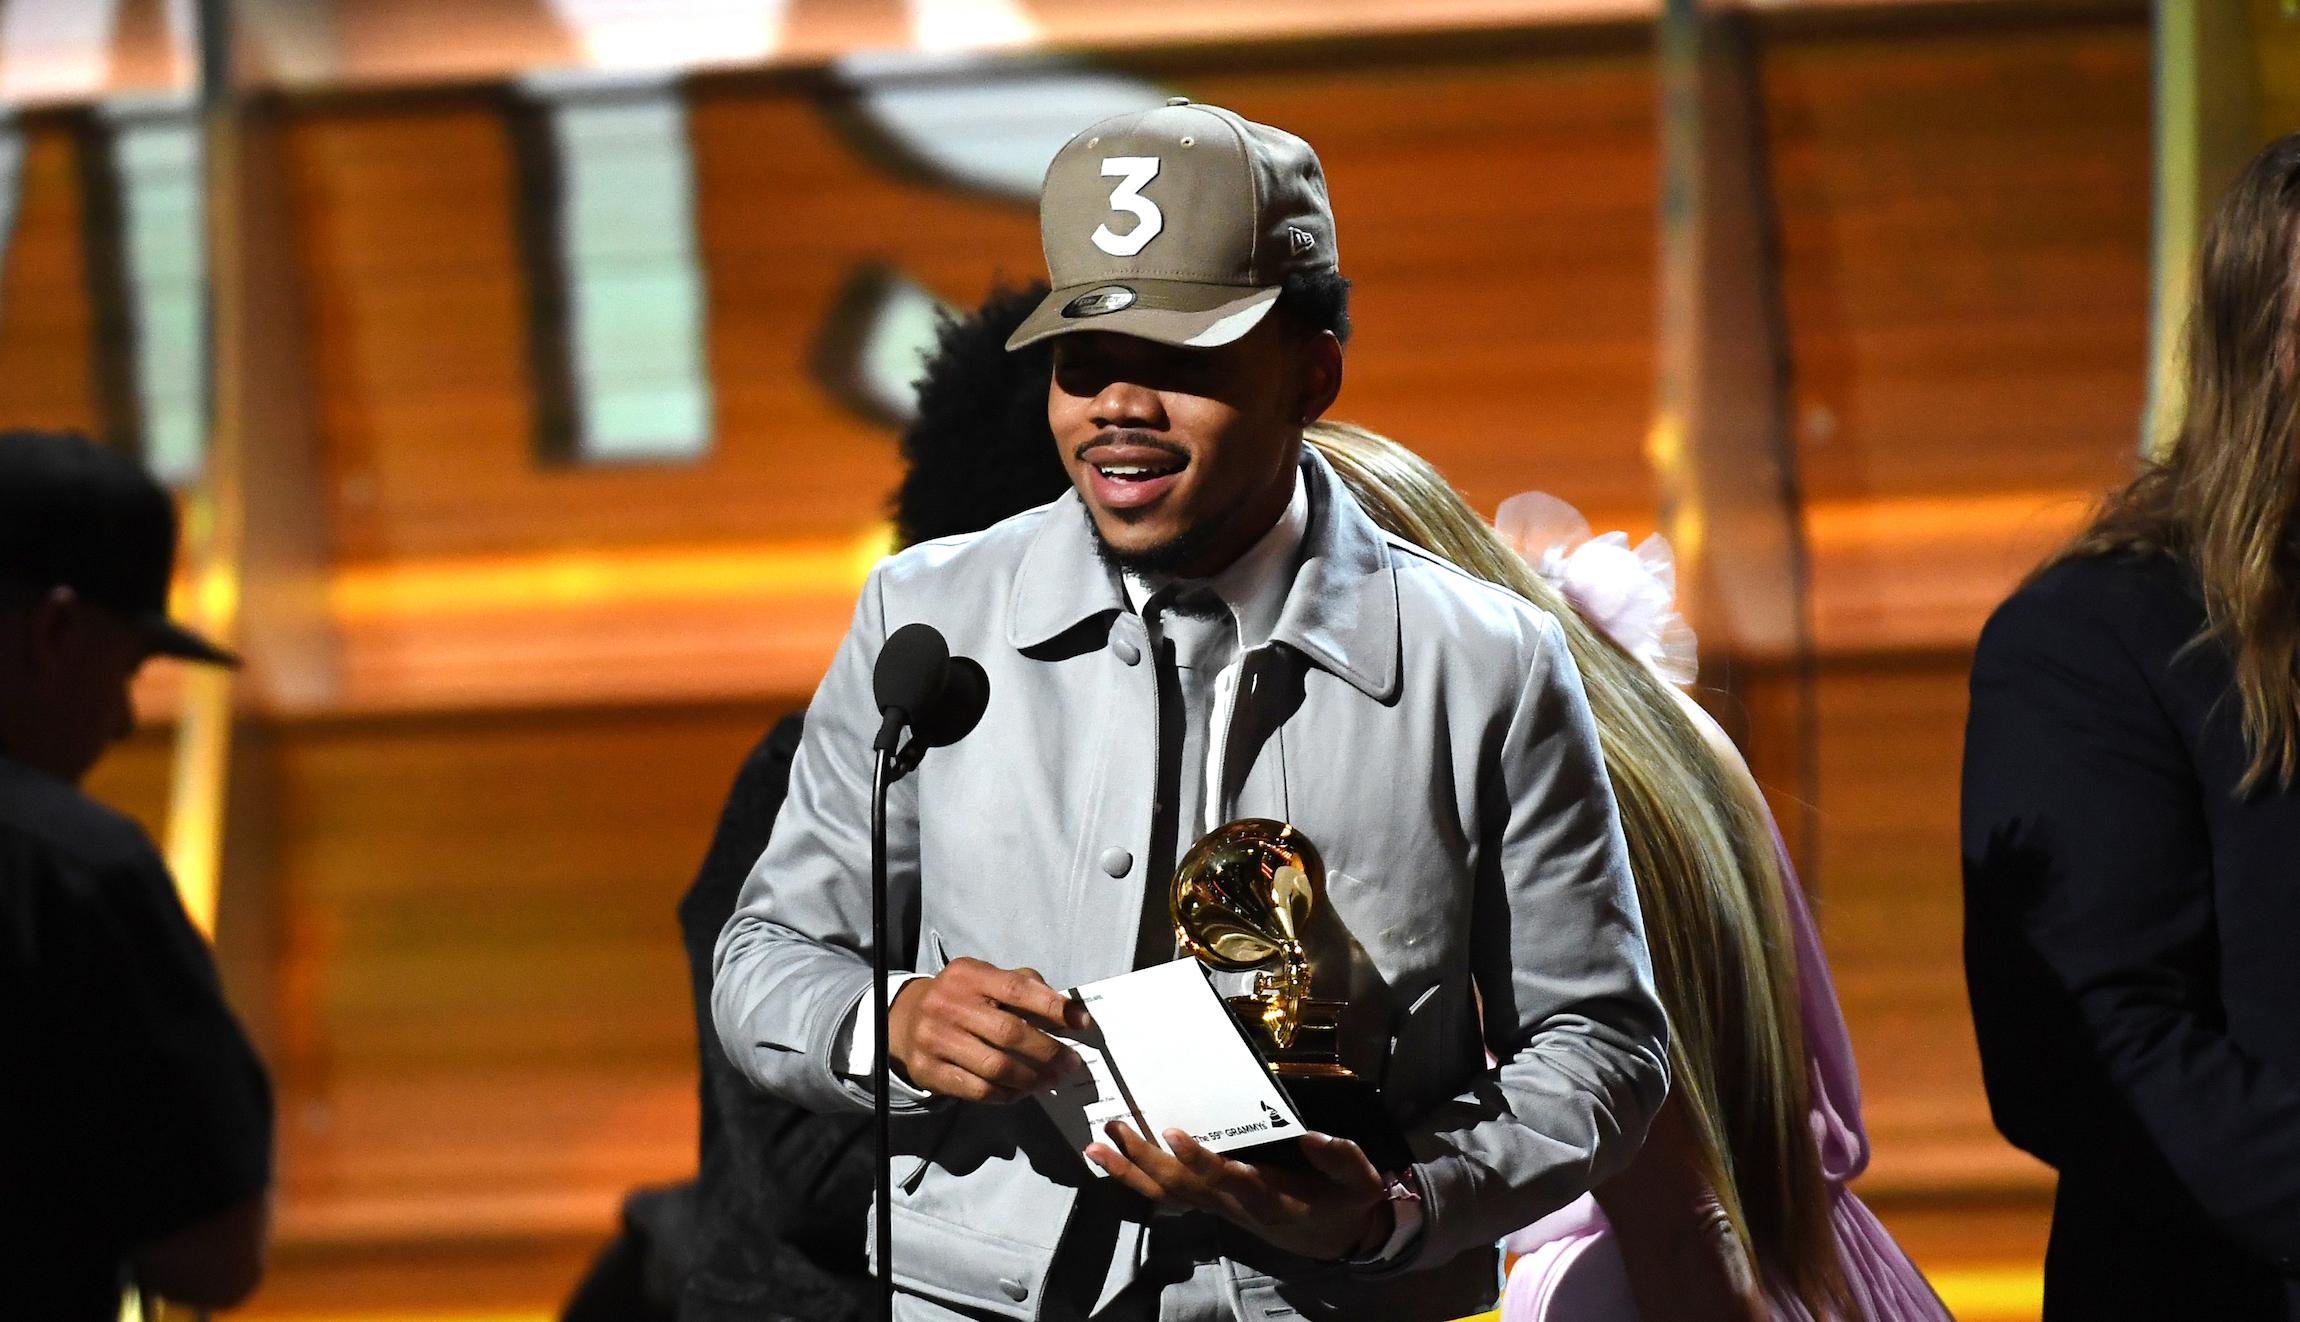 Chance the Rapper accepts the award for Best New Artist at the 59th GRAMMY Awards on February 12, 2017 in Los Angeles, California.